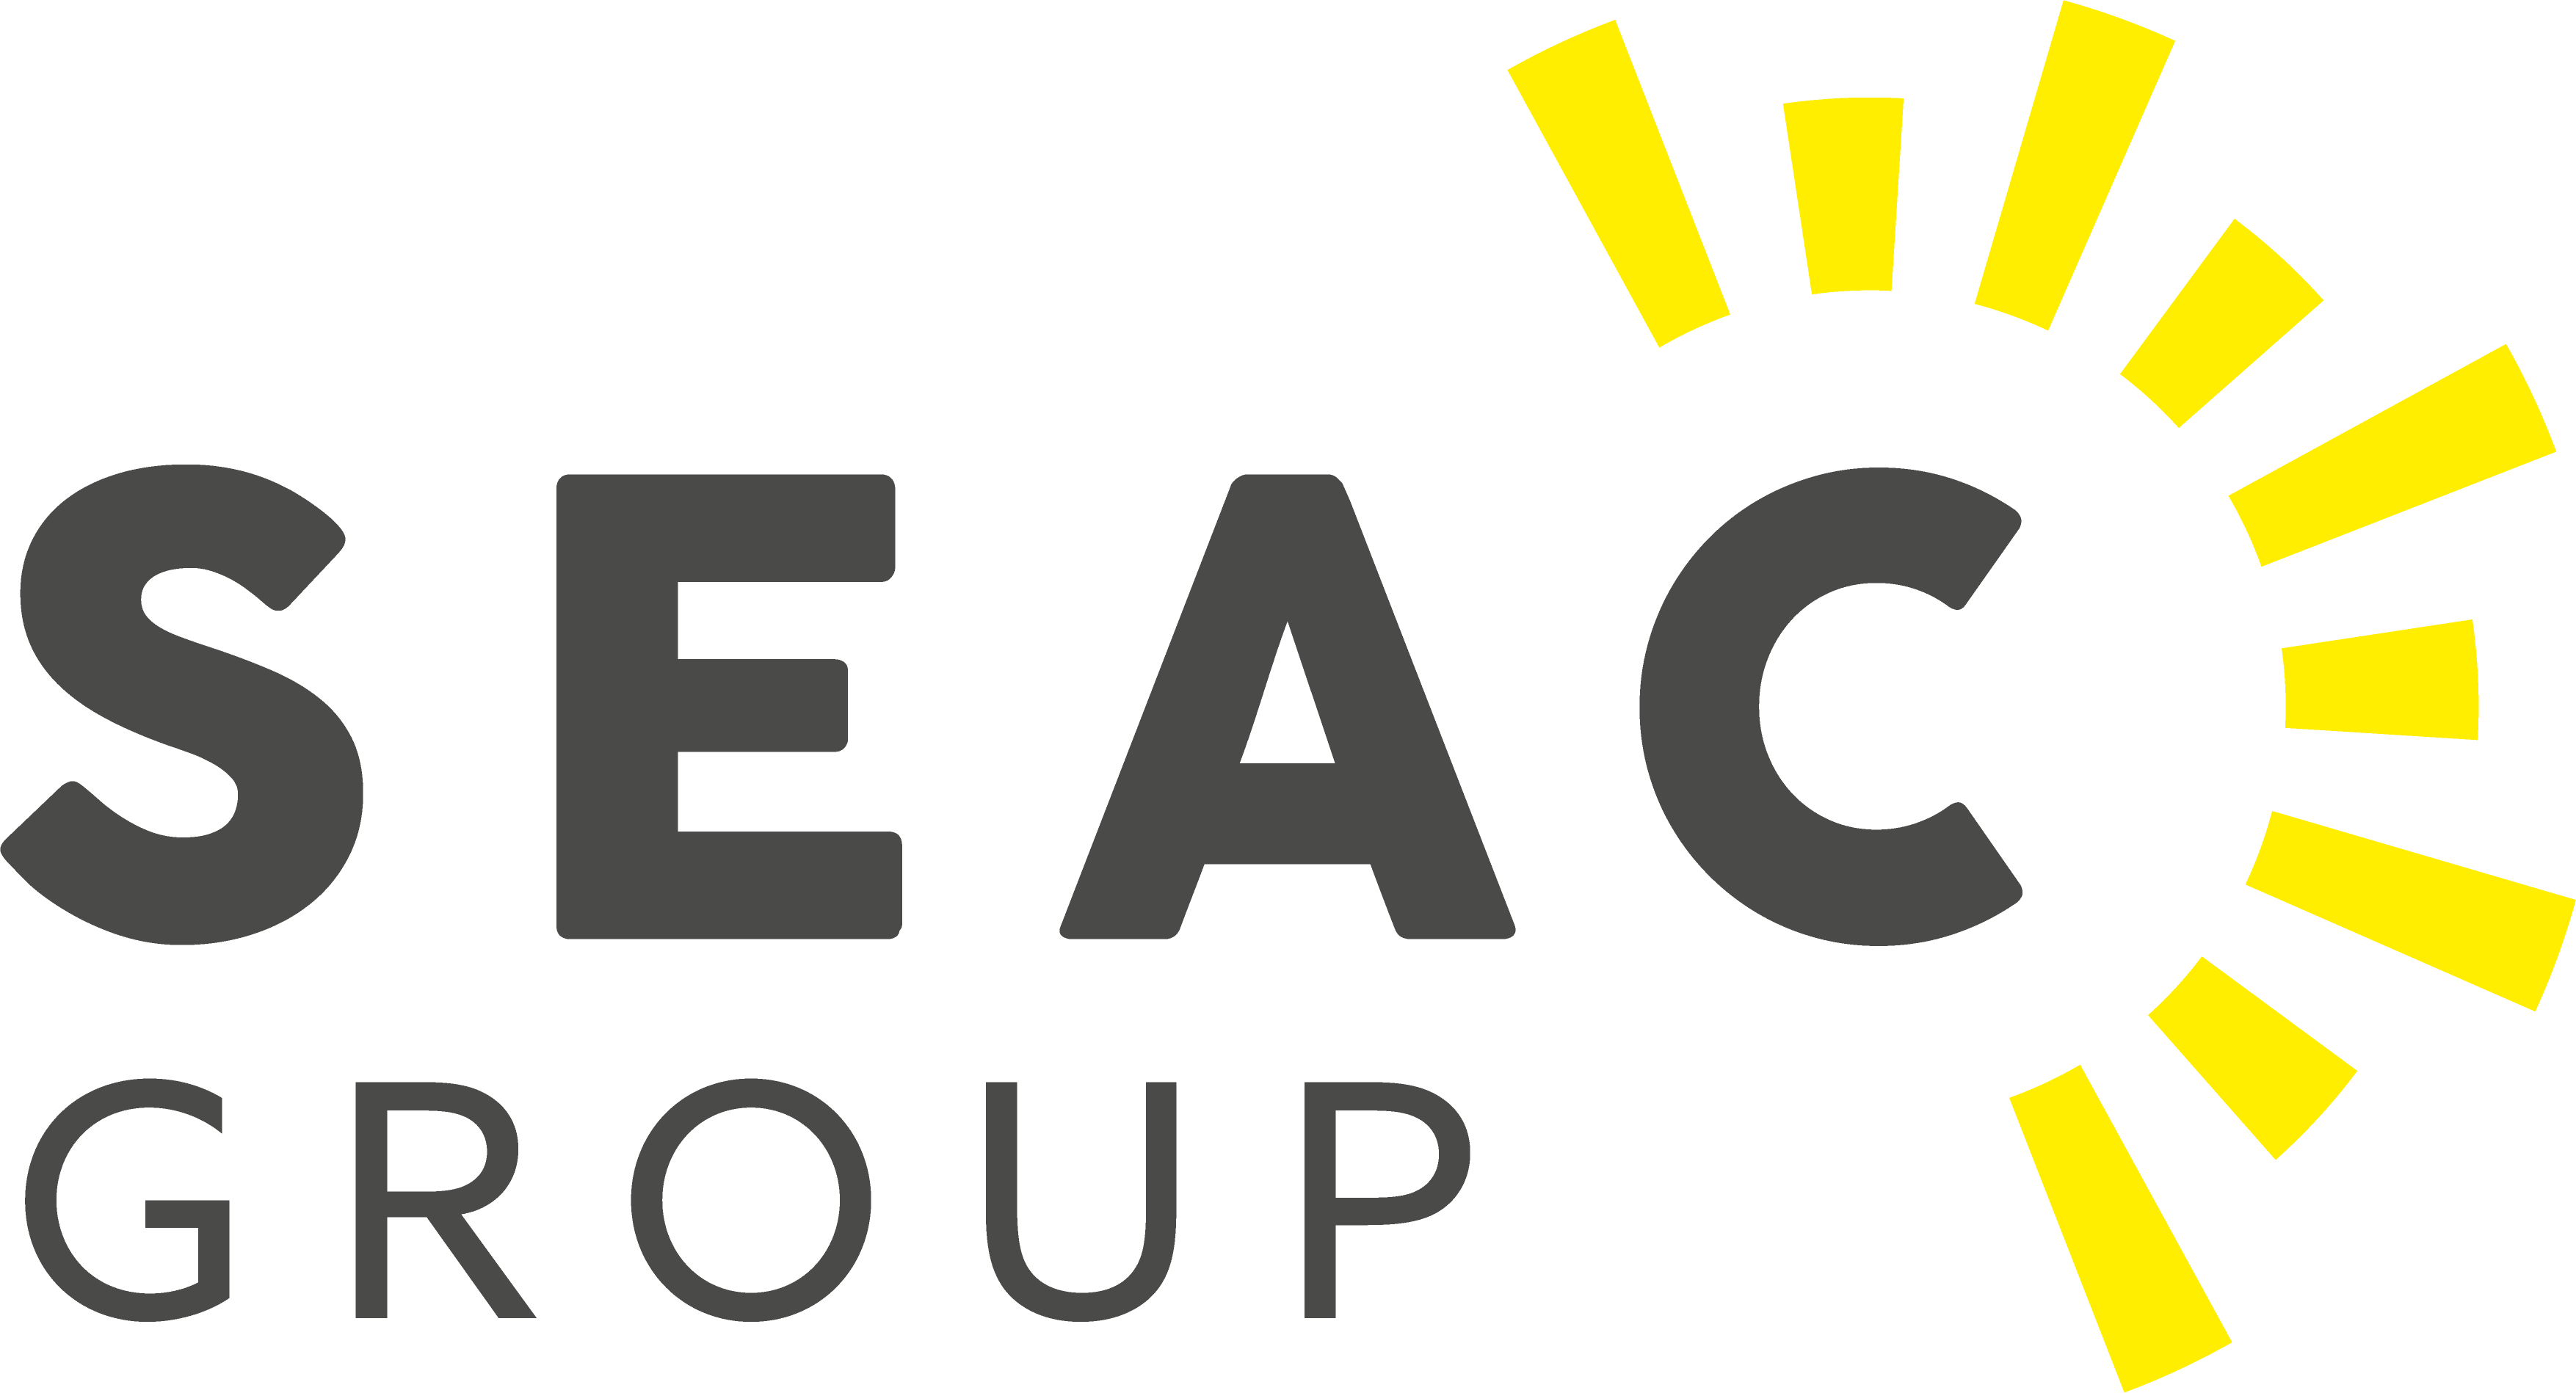 Seac Group (photovoltaic Project Pipeline)